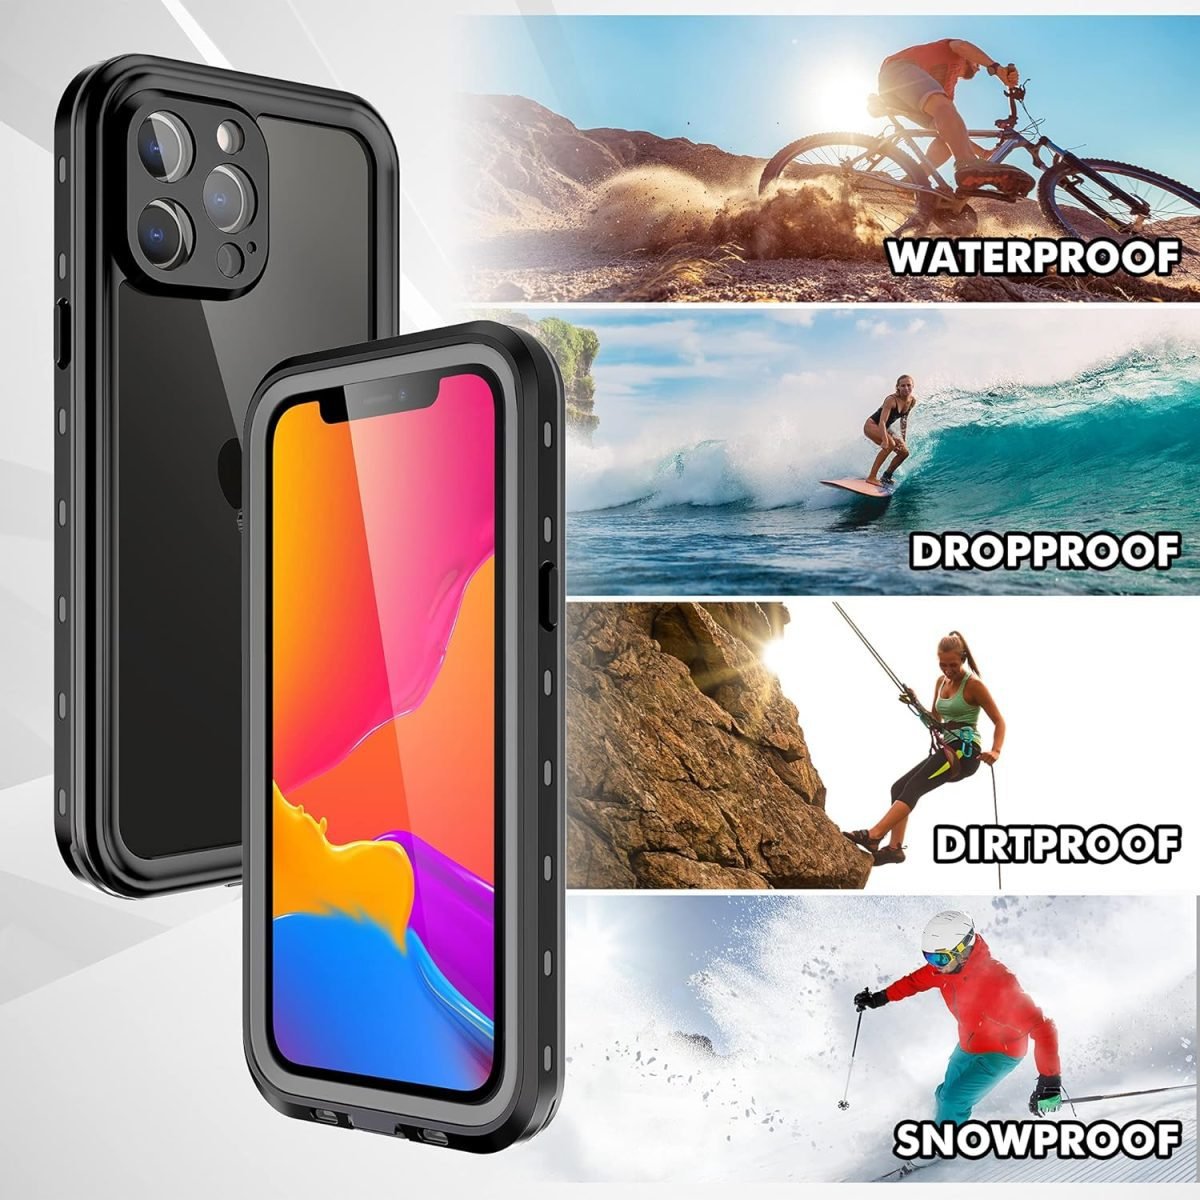 Shockproof, Dustproof, Drop-proof, Waterproof Wireless Magnetic High-Quality Phone Case For iPhone 13 Pro Max by Coral Case